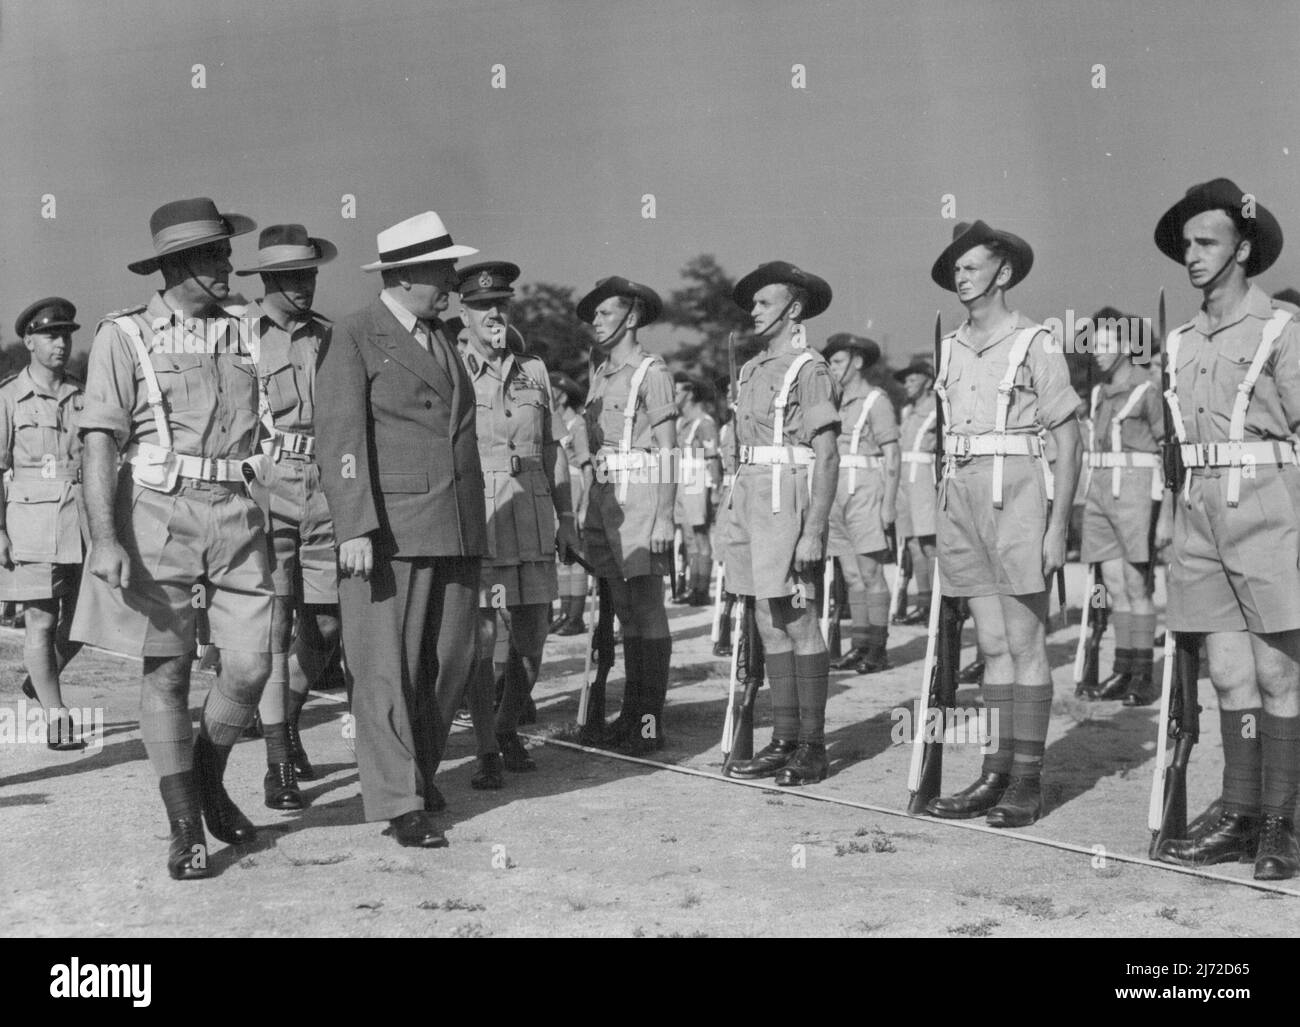 The Rt. Hon. R.G. Menzies inspecting troops of Royal Aust. Army Service Corps. Left to right; Lt. Col. Fairclough commanding officer ***** Col. F.S. Walsh Parade Commander, The Rt. Hon. R.G. Menzies **** C-in-C BCOF Lt. Gen. Sir Horace Robertson. The Australian Prime Minister, The Rt. Hon. R/G. Menzies, today inspected troops of the British Commonwealth Occupations Force at a parade on Anzac Park, Kure, Japan, on 16 Aug. '50. August 16, 1950. Stock Photo